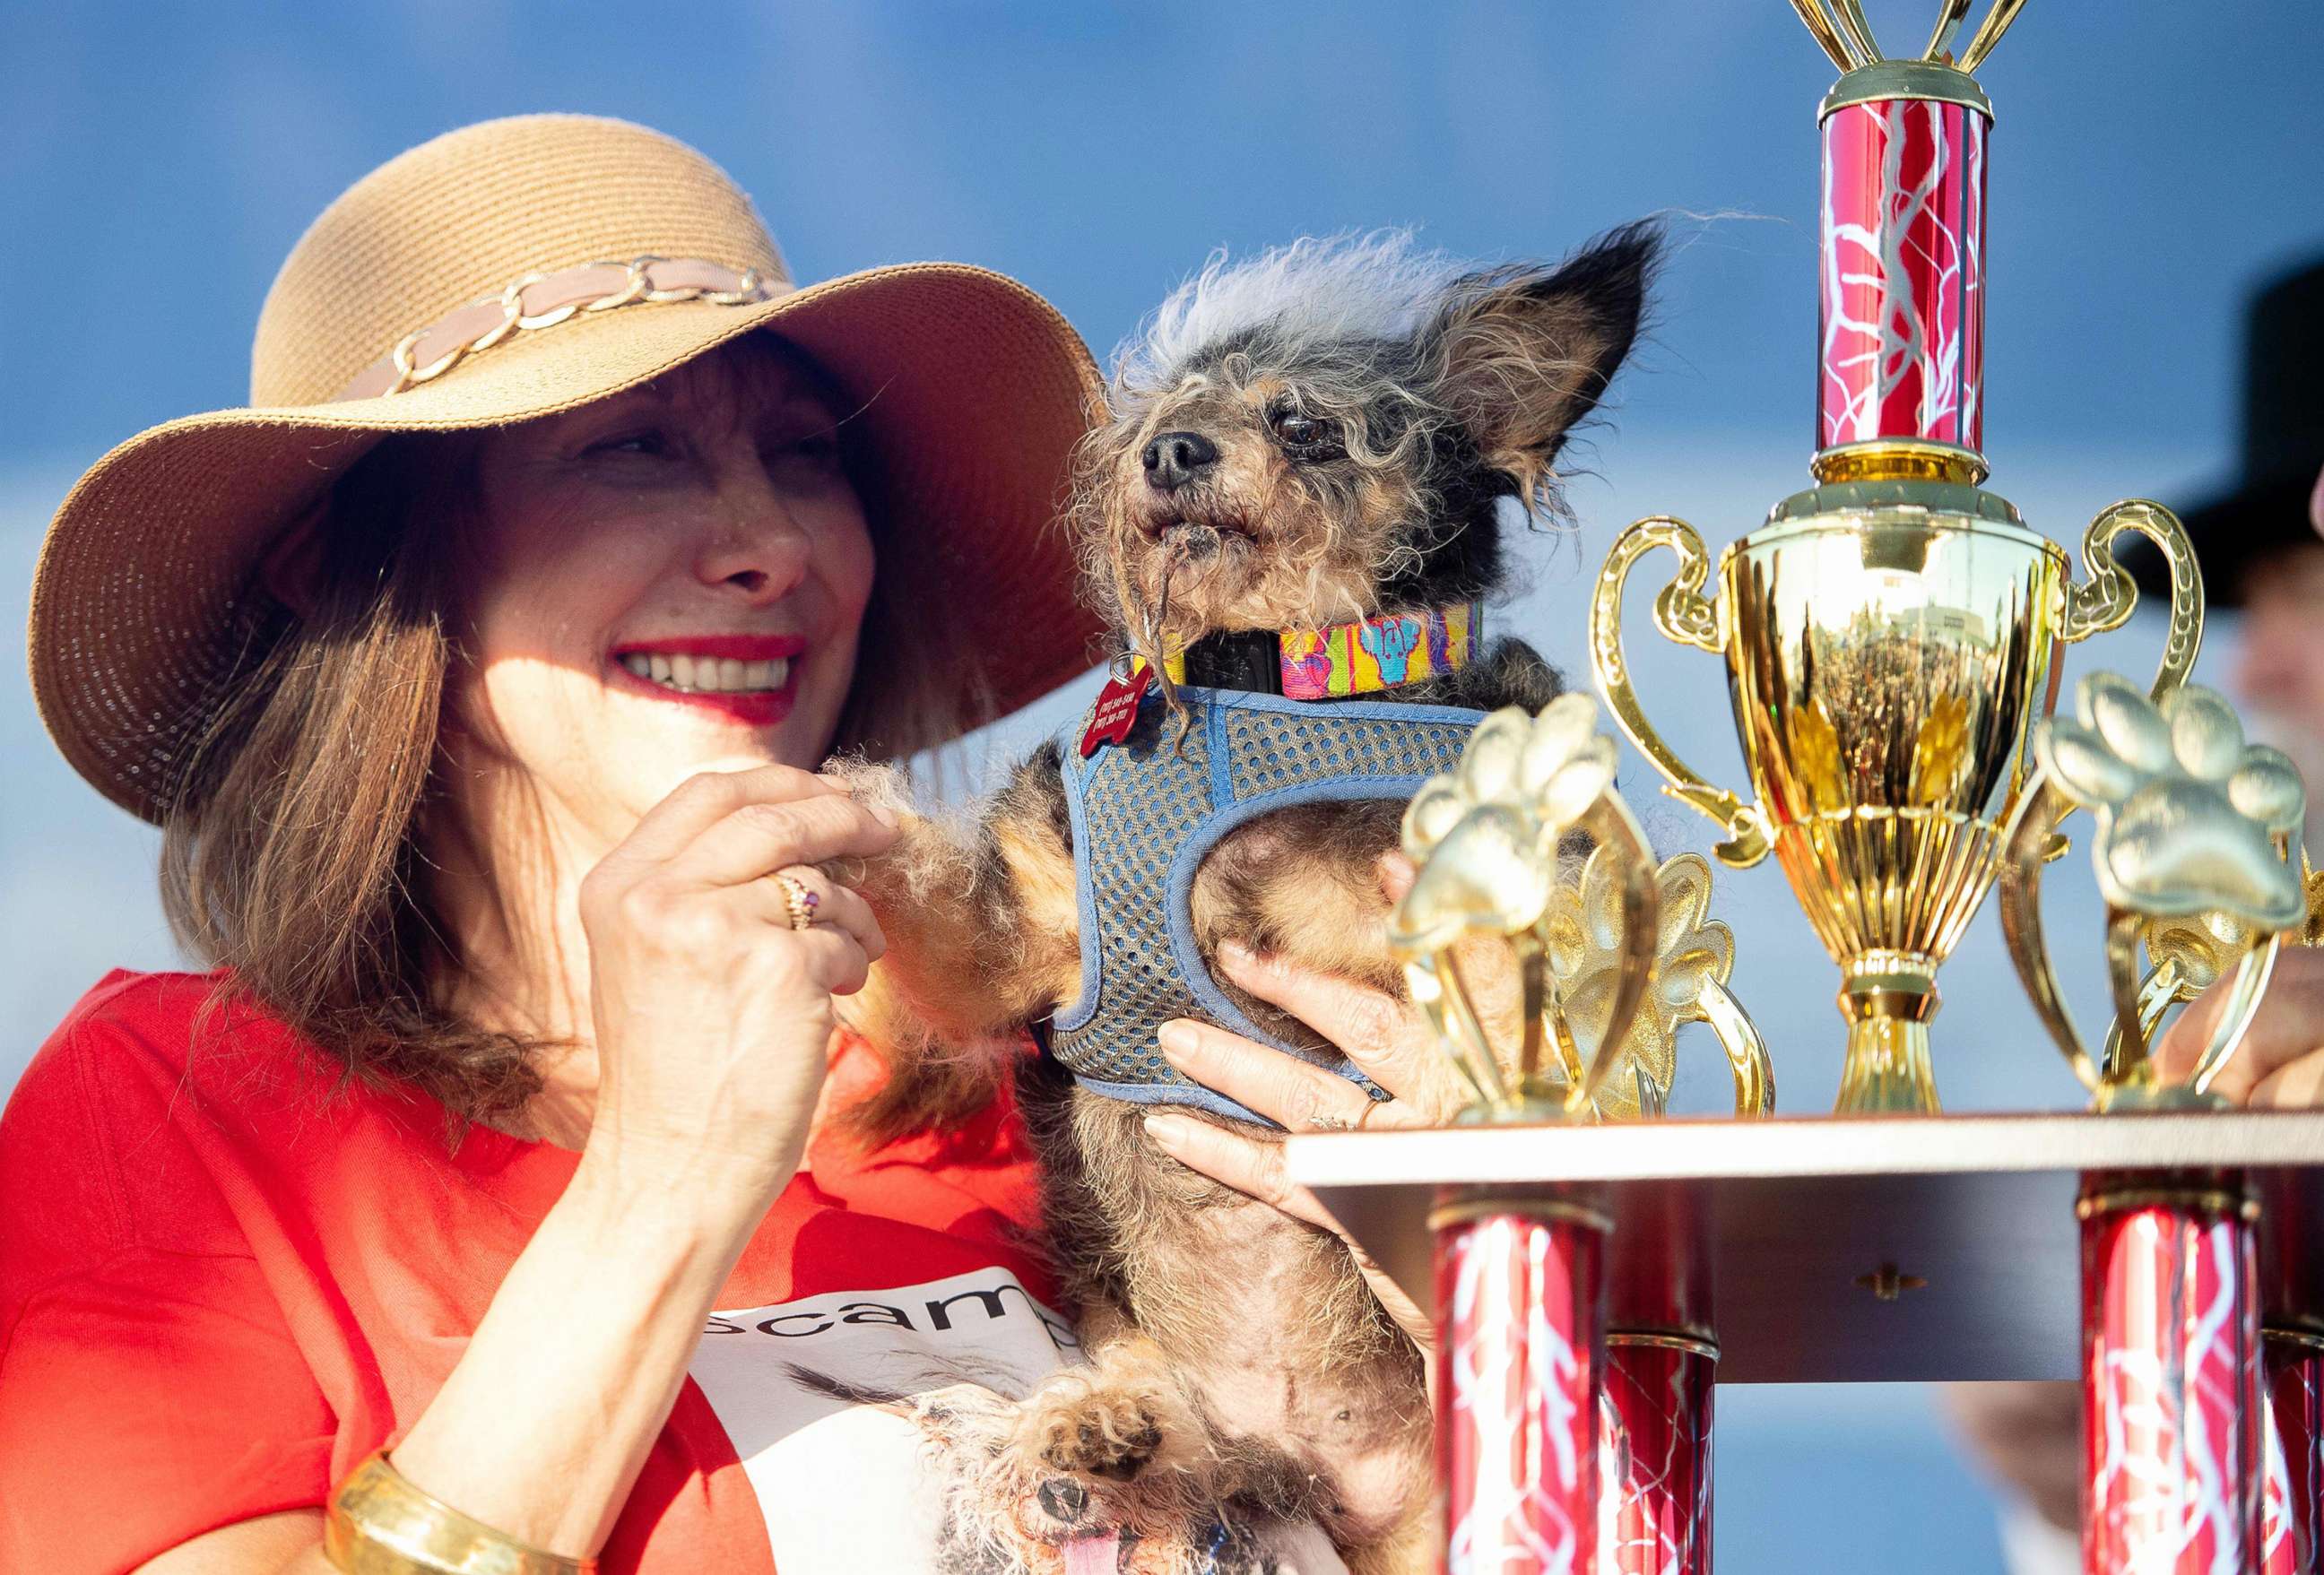 PHOTO: Darlene Wright holds up Scamp the Tramp as it is announced that he won first prize in the World's Ugliest Dog Competition in Petaluma, Calif., June 21, 2019.